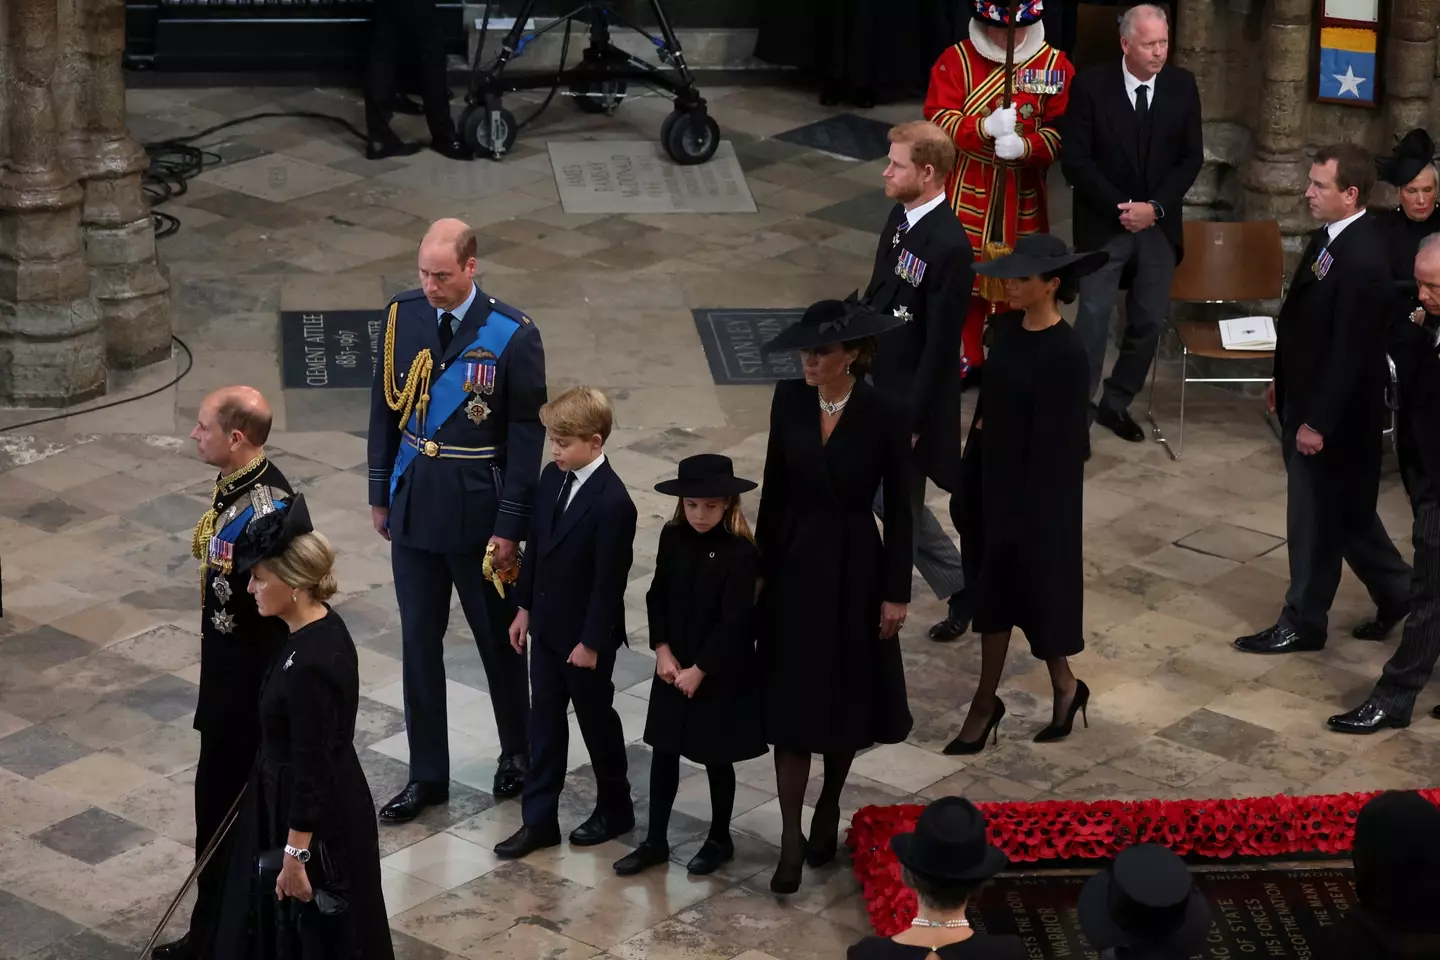 Princess Charlotte and Prince George at the Queen's funeral.